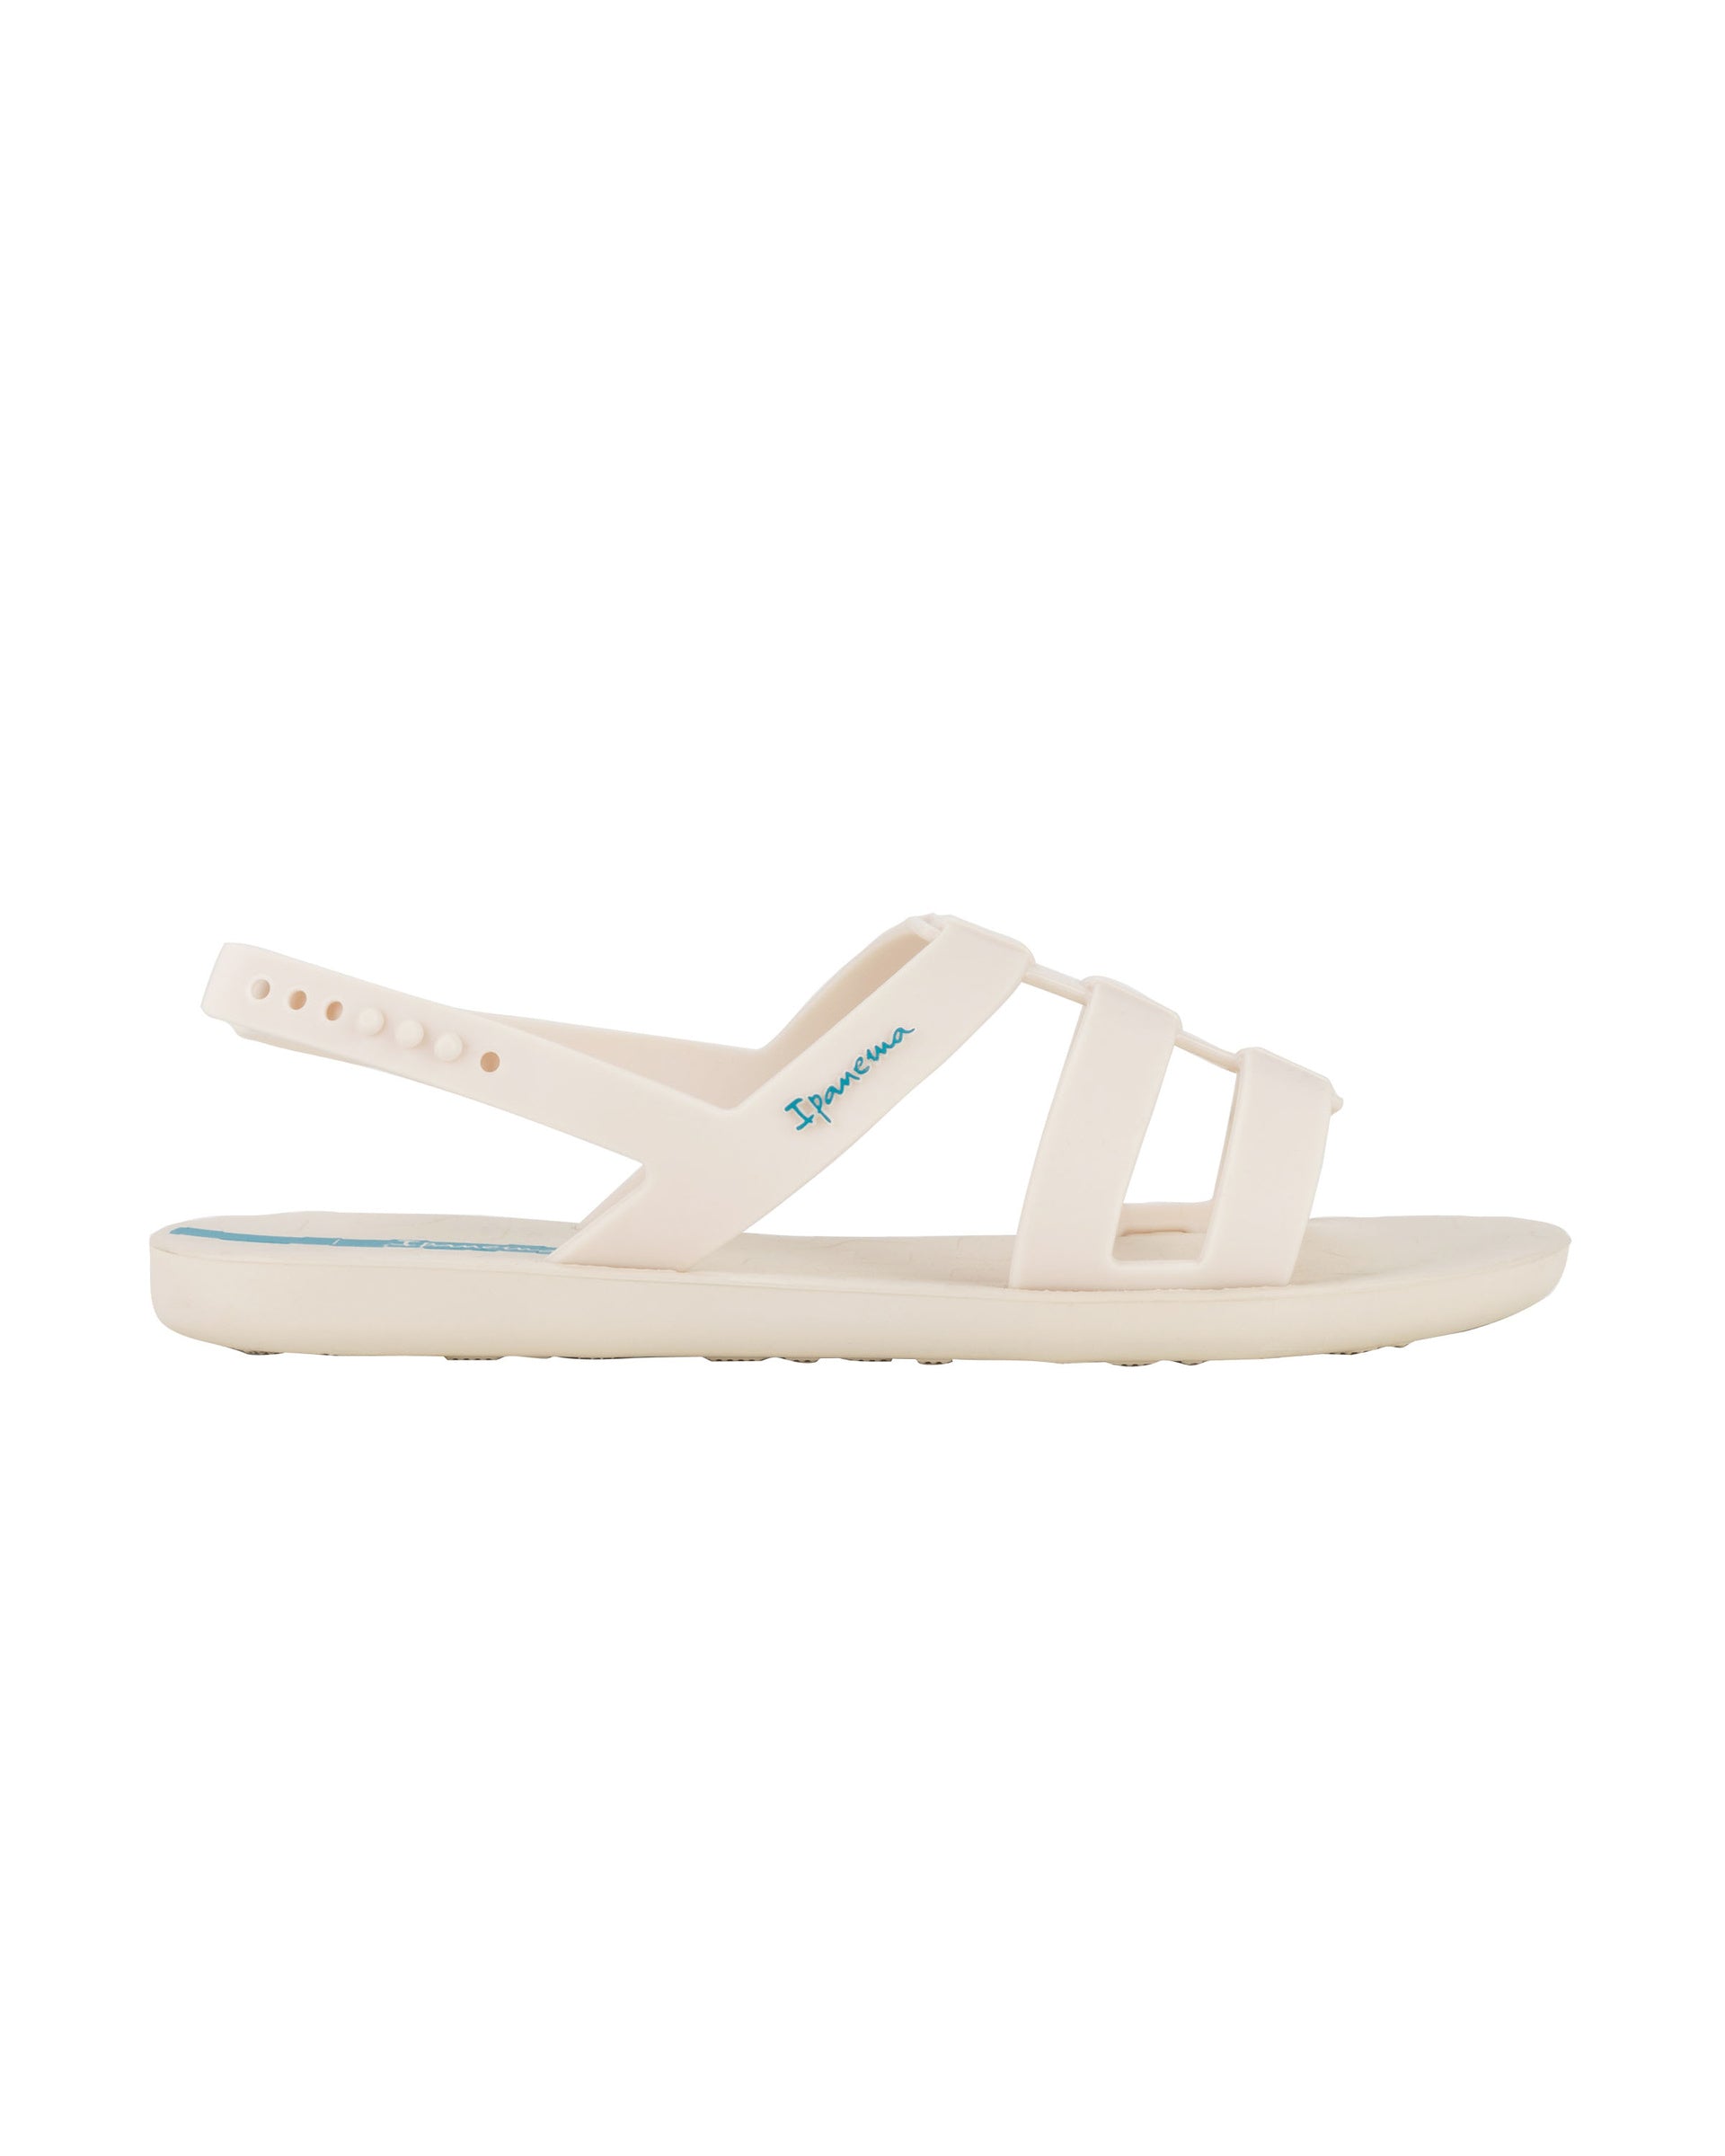 Outer side view of a beige Ipanema Style women's sandal.